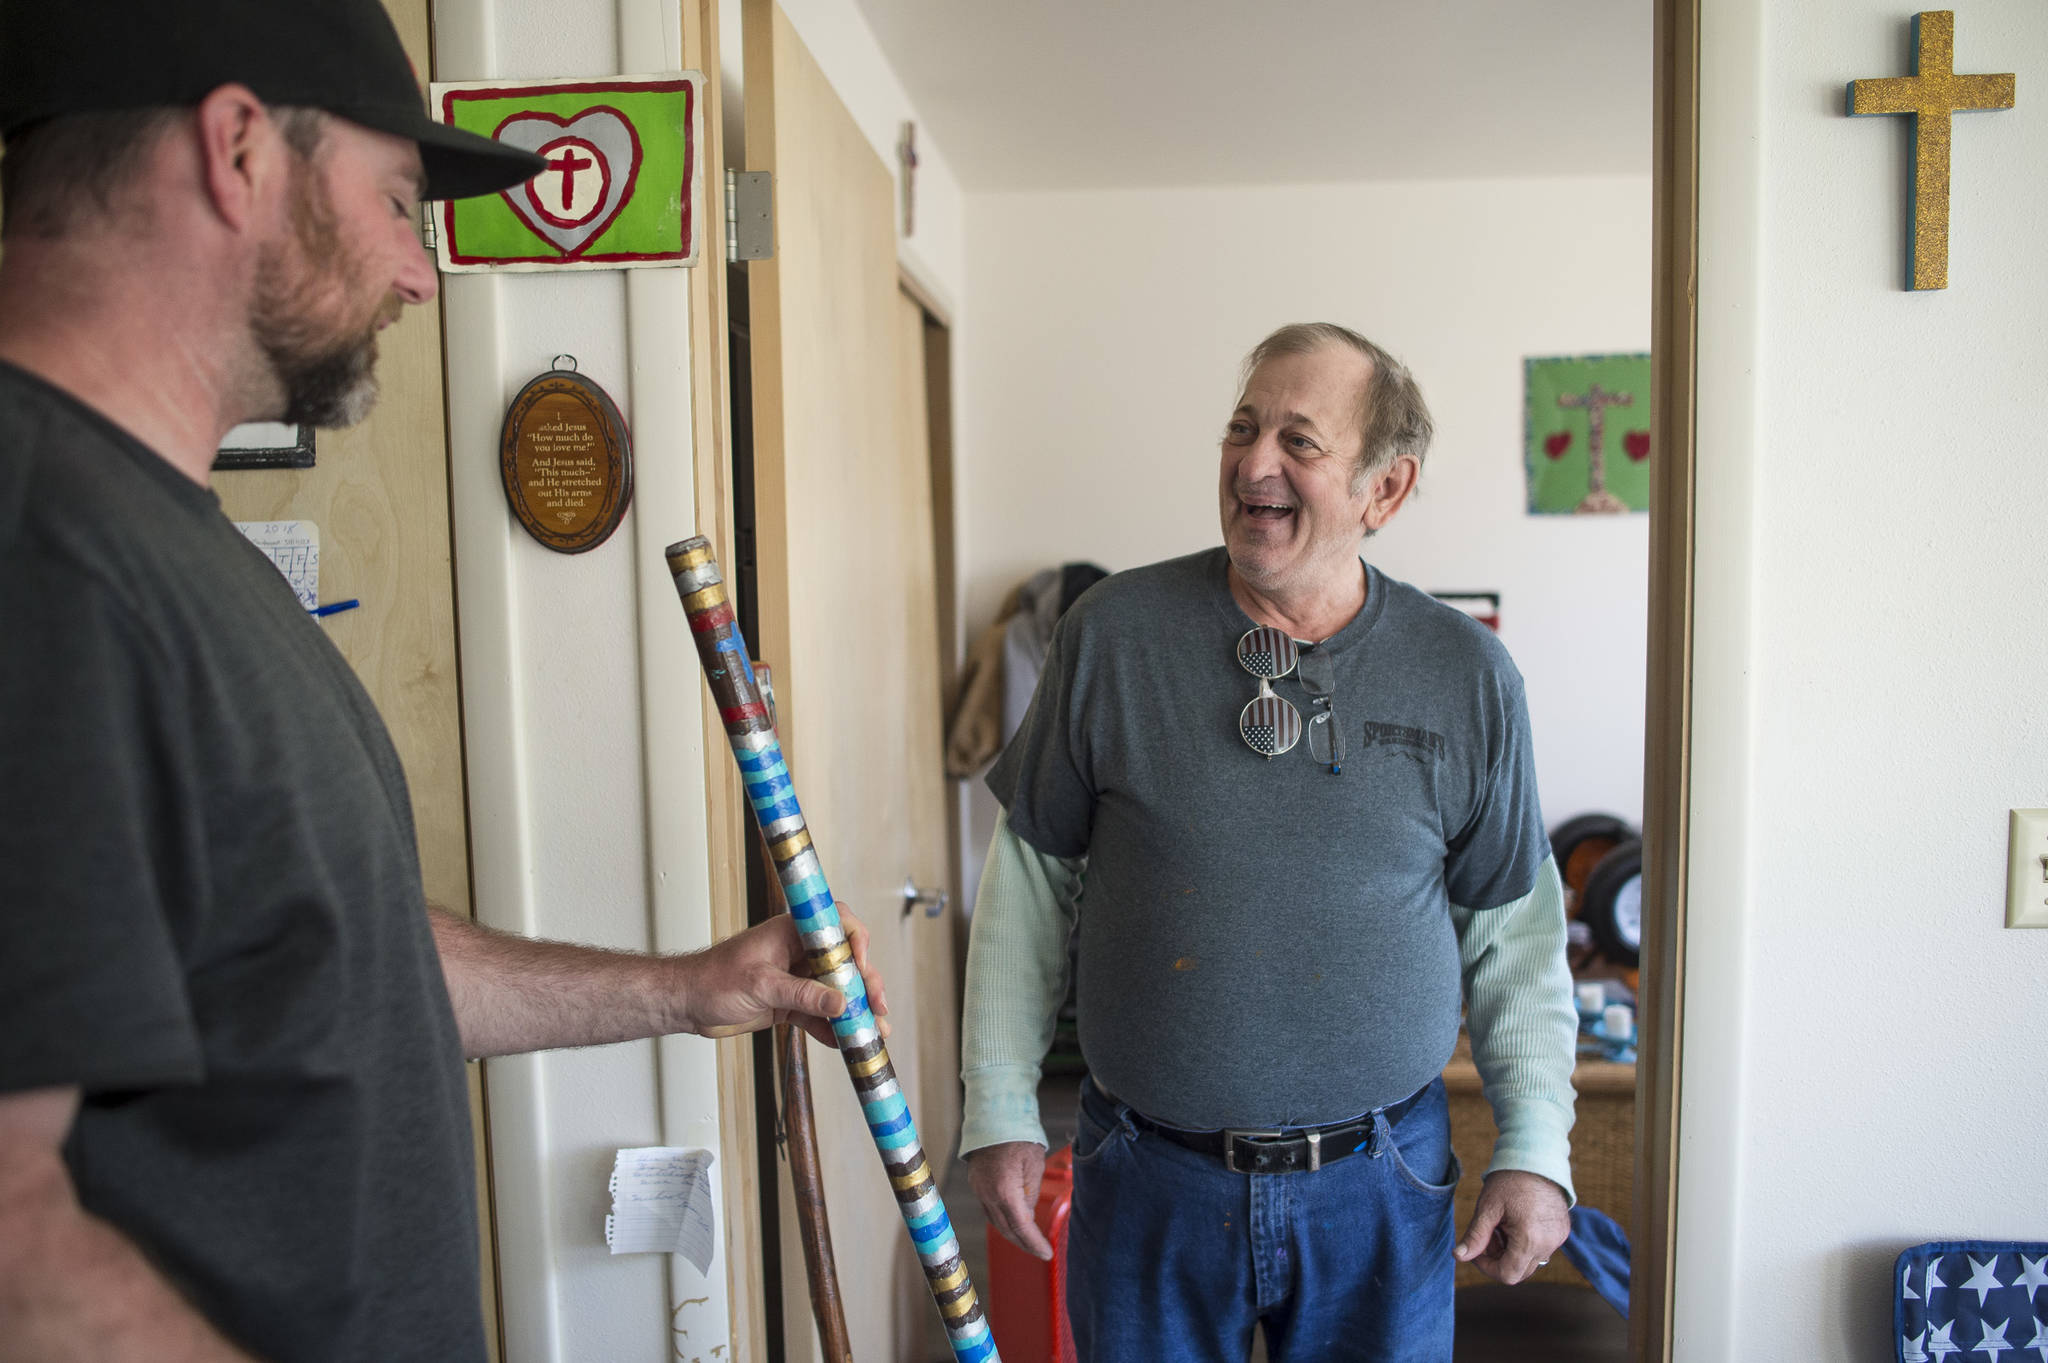 Michael Good, right, shows off his painted walking stick to Trevor Kellar, a community navigator for the St. Vincent de Paul Society, on Friday, July 20, 2018. Kellar helped Good, who has been homeless for most of his life, get a long-term apartment at the society’s Smith Hall Senior Apartments. (Michael Penn | Juneau Empire)